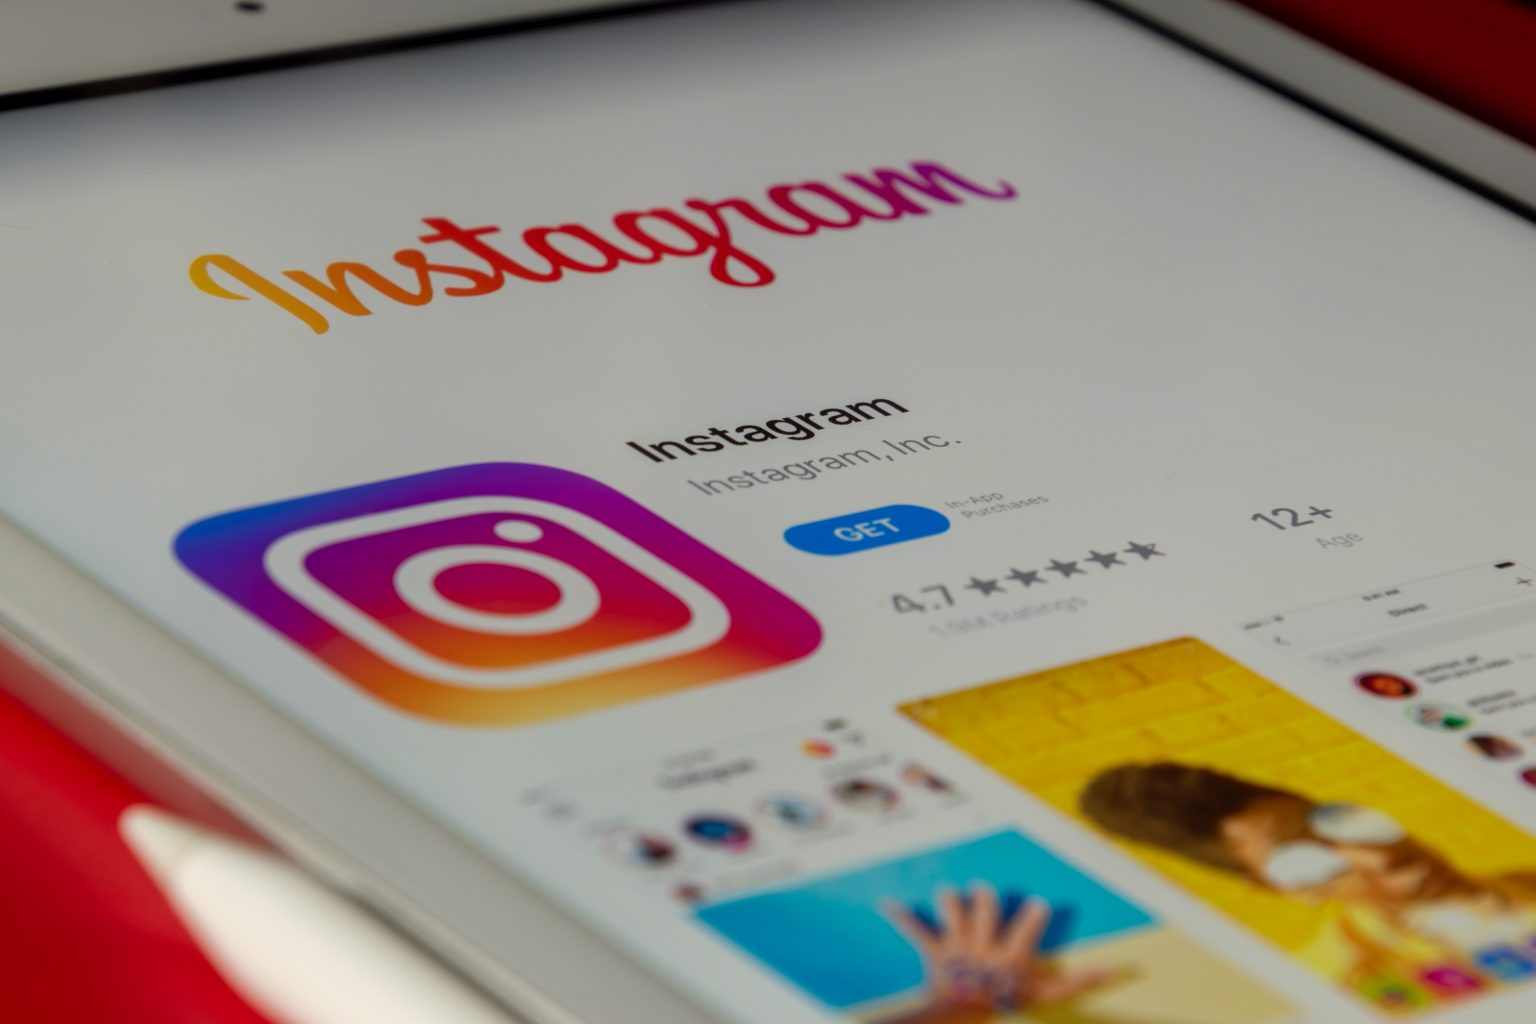 How to Add Audio to Instagram Reels Using a TexttoSpeech Tool in 3